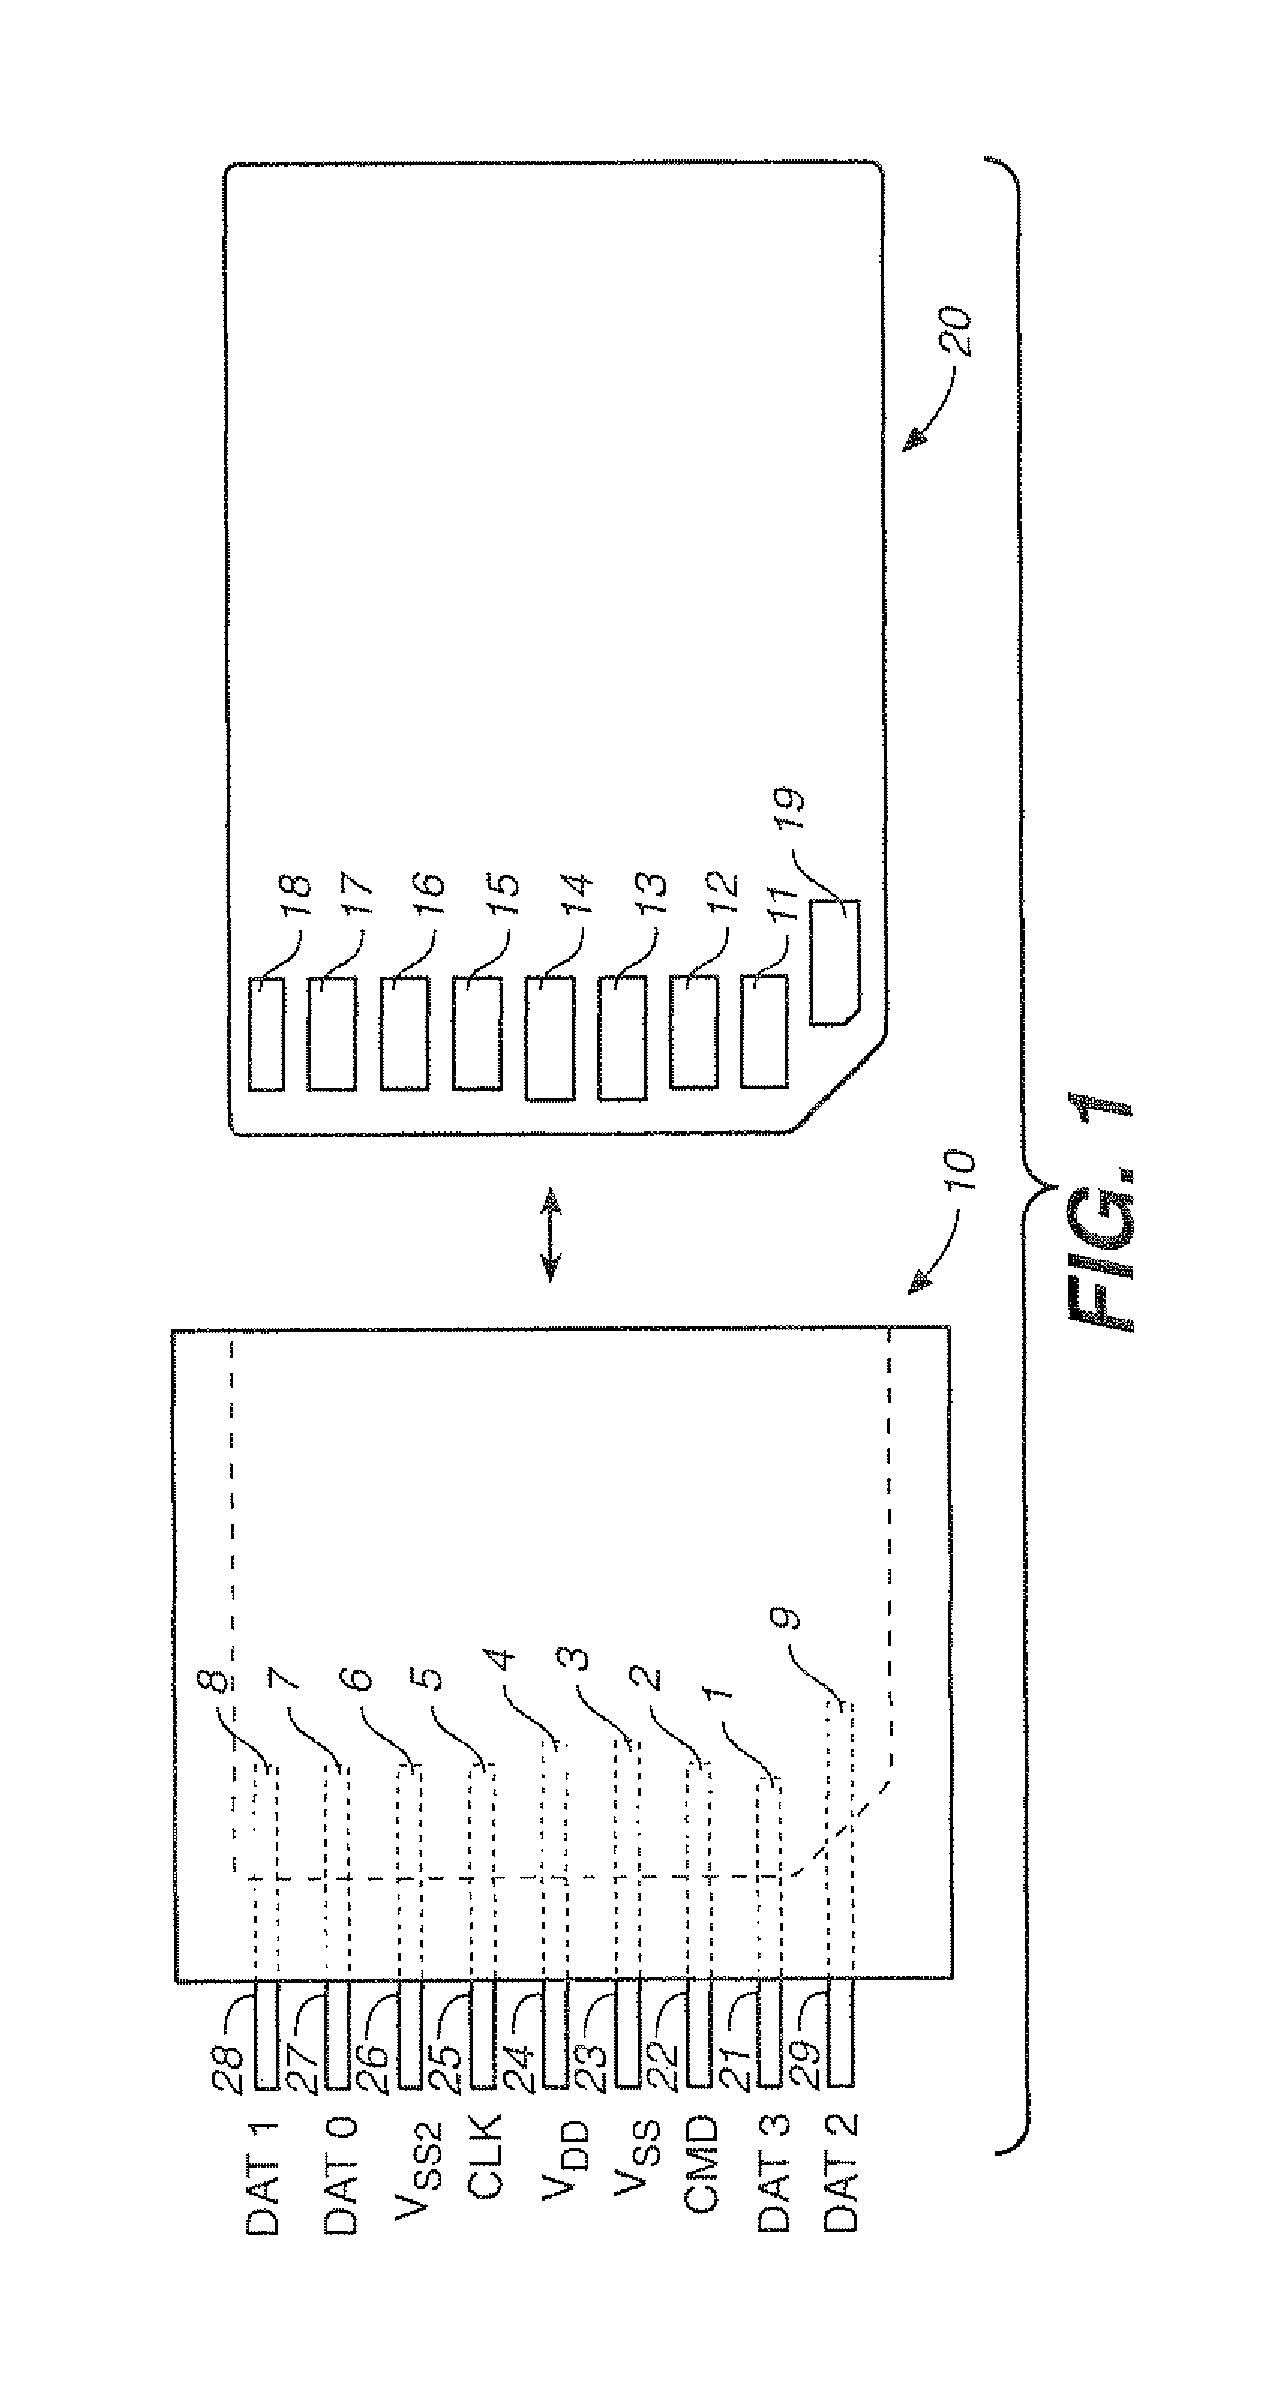 Enhancement of input/output for non source-synchronous interfaces